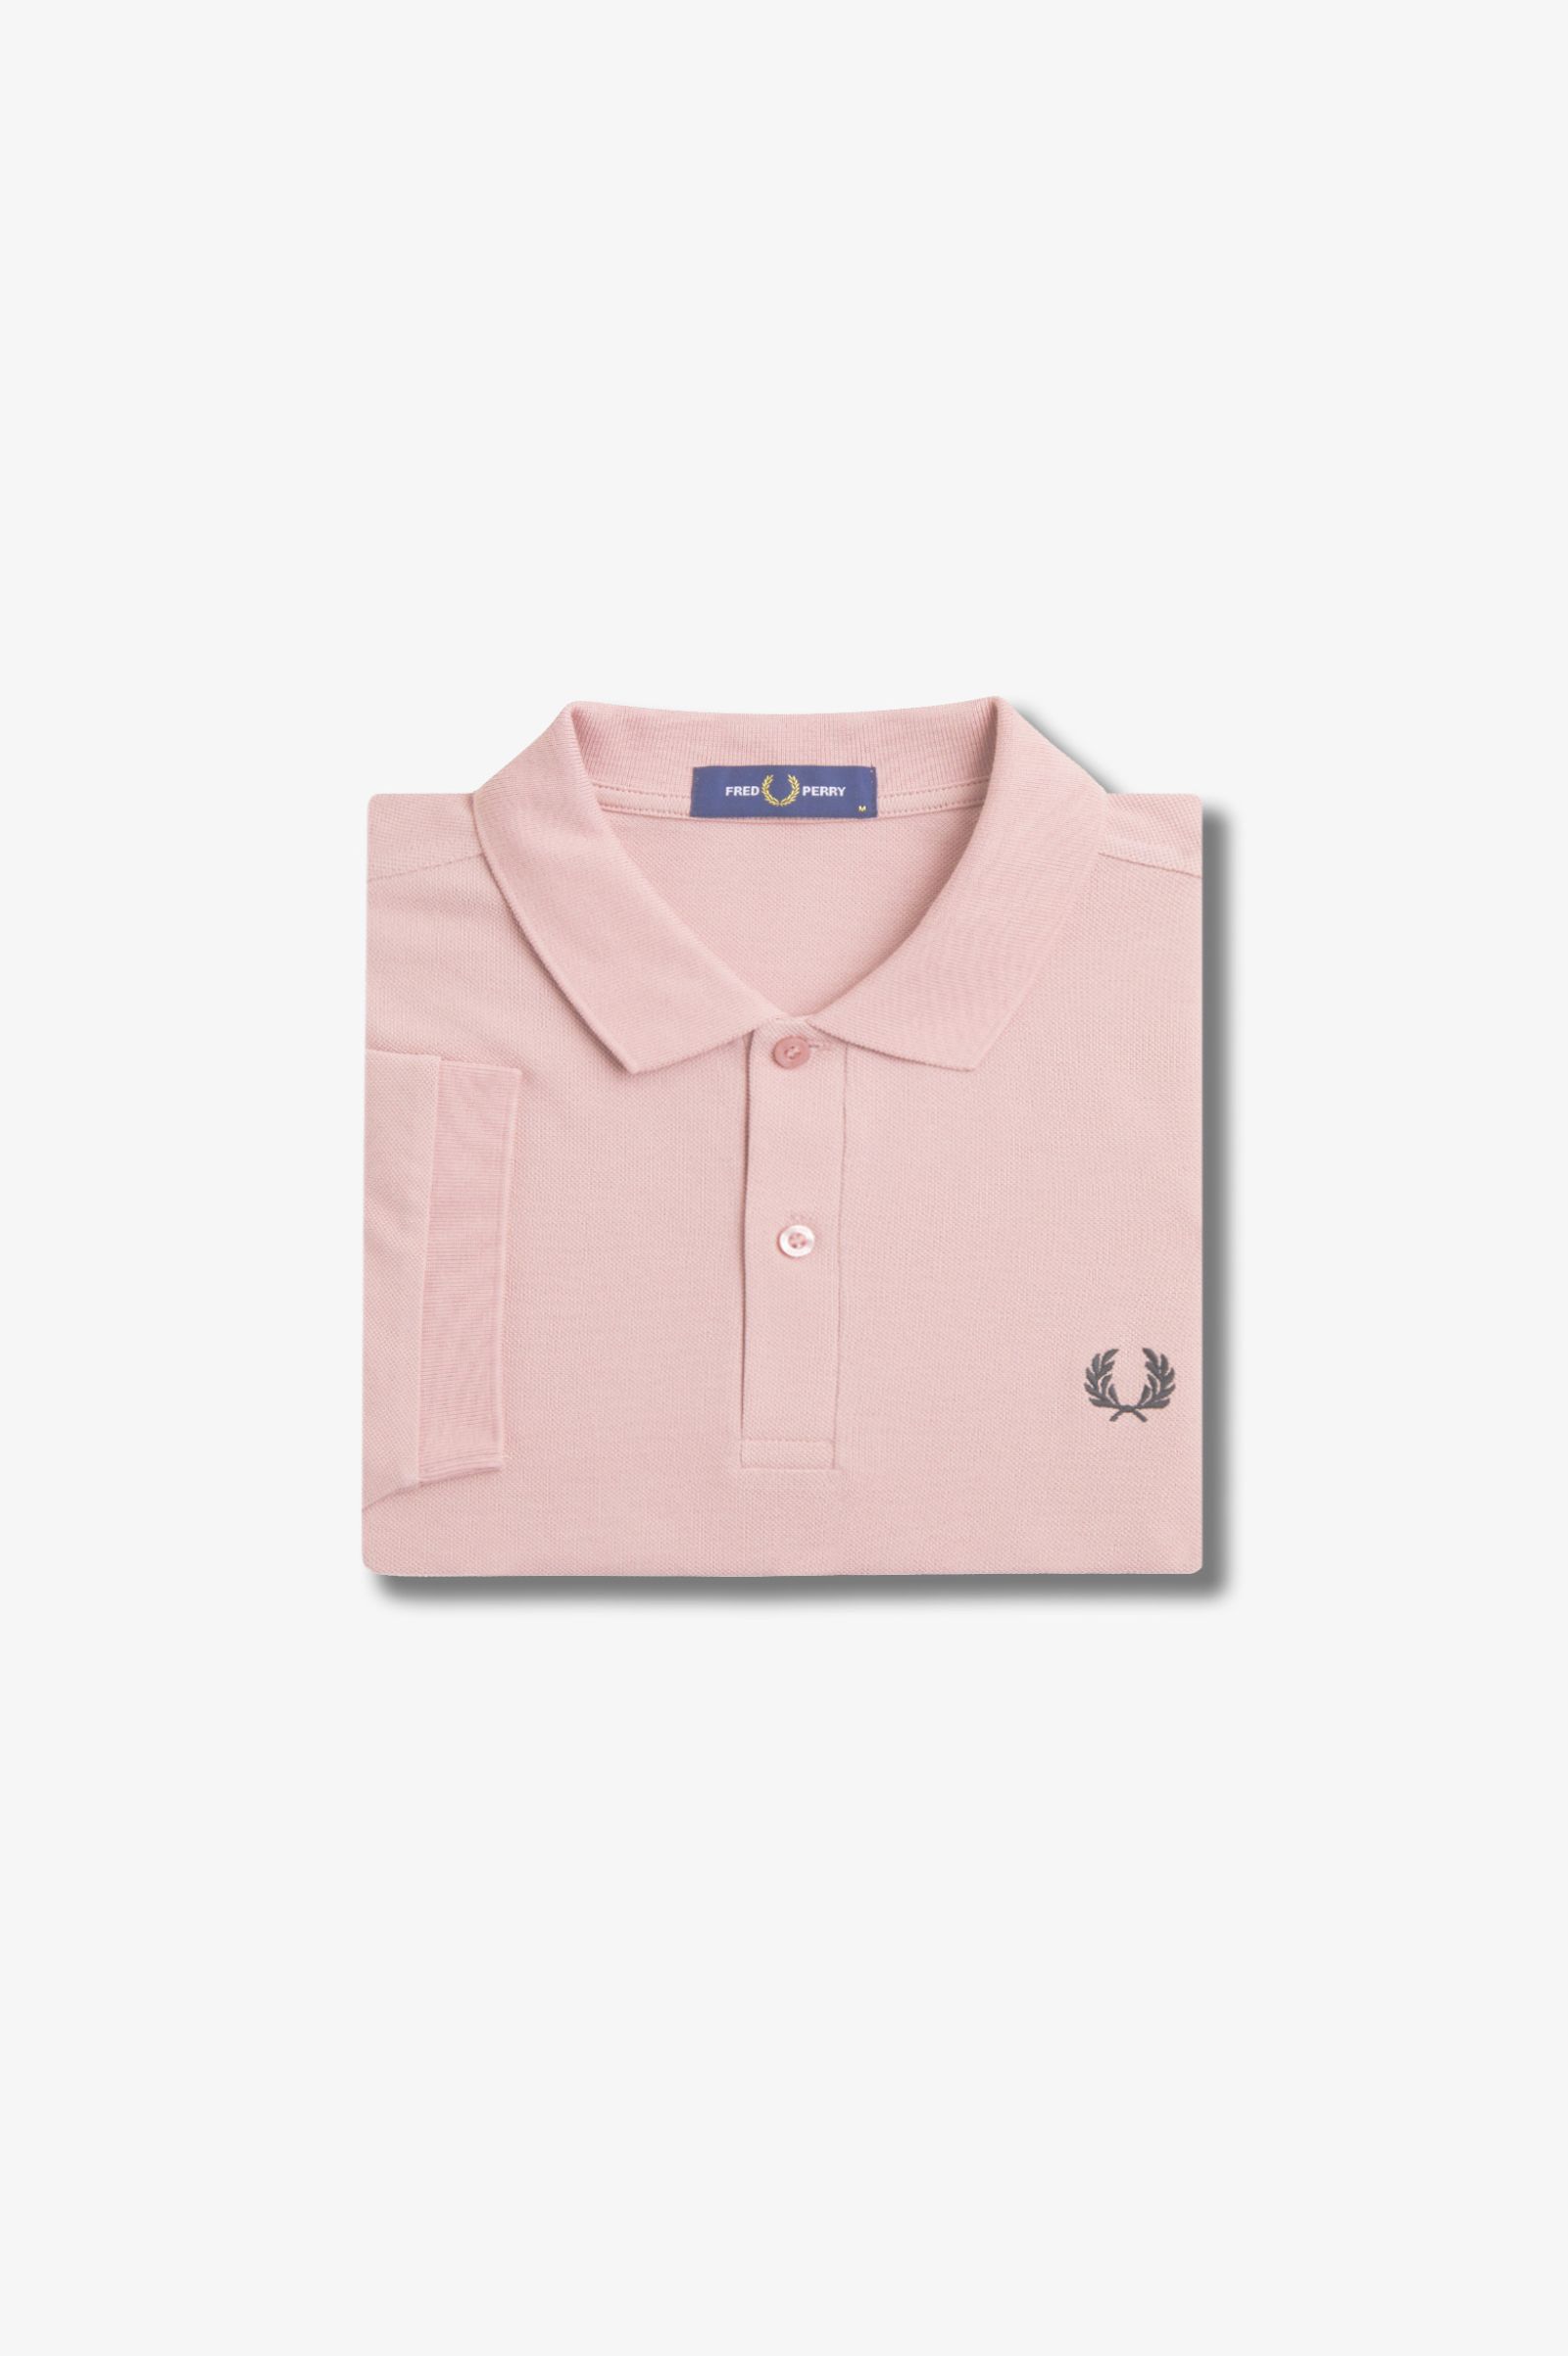 Fred Perry Plain Shirt M6000 in Dusty Rose Pink / Black